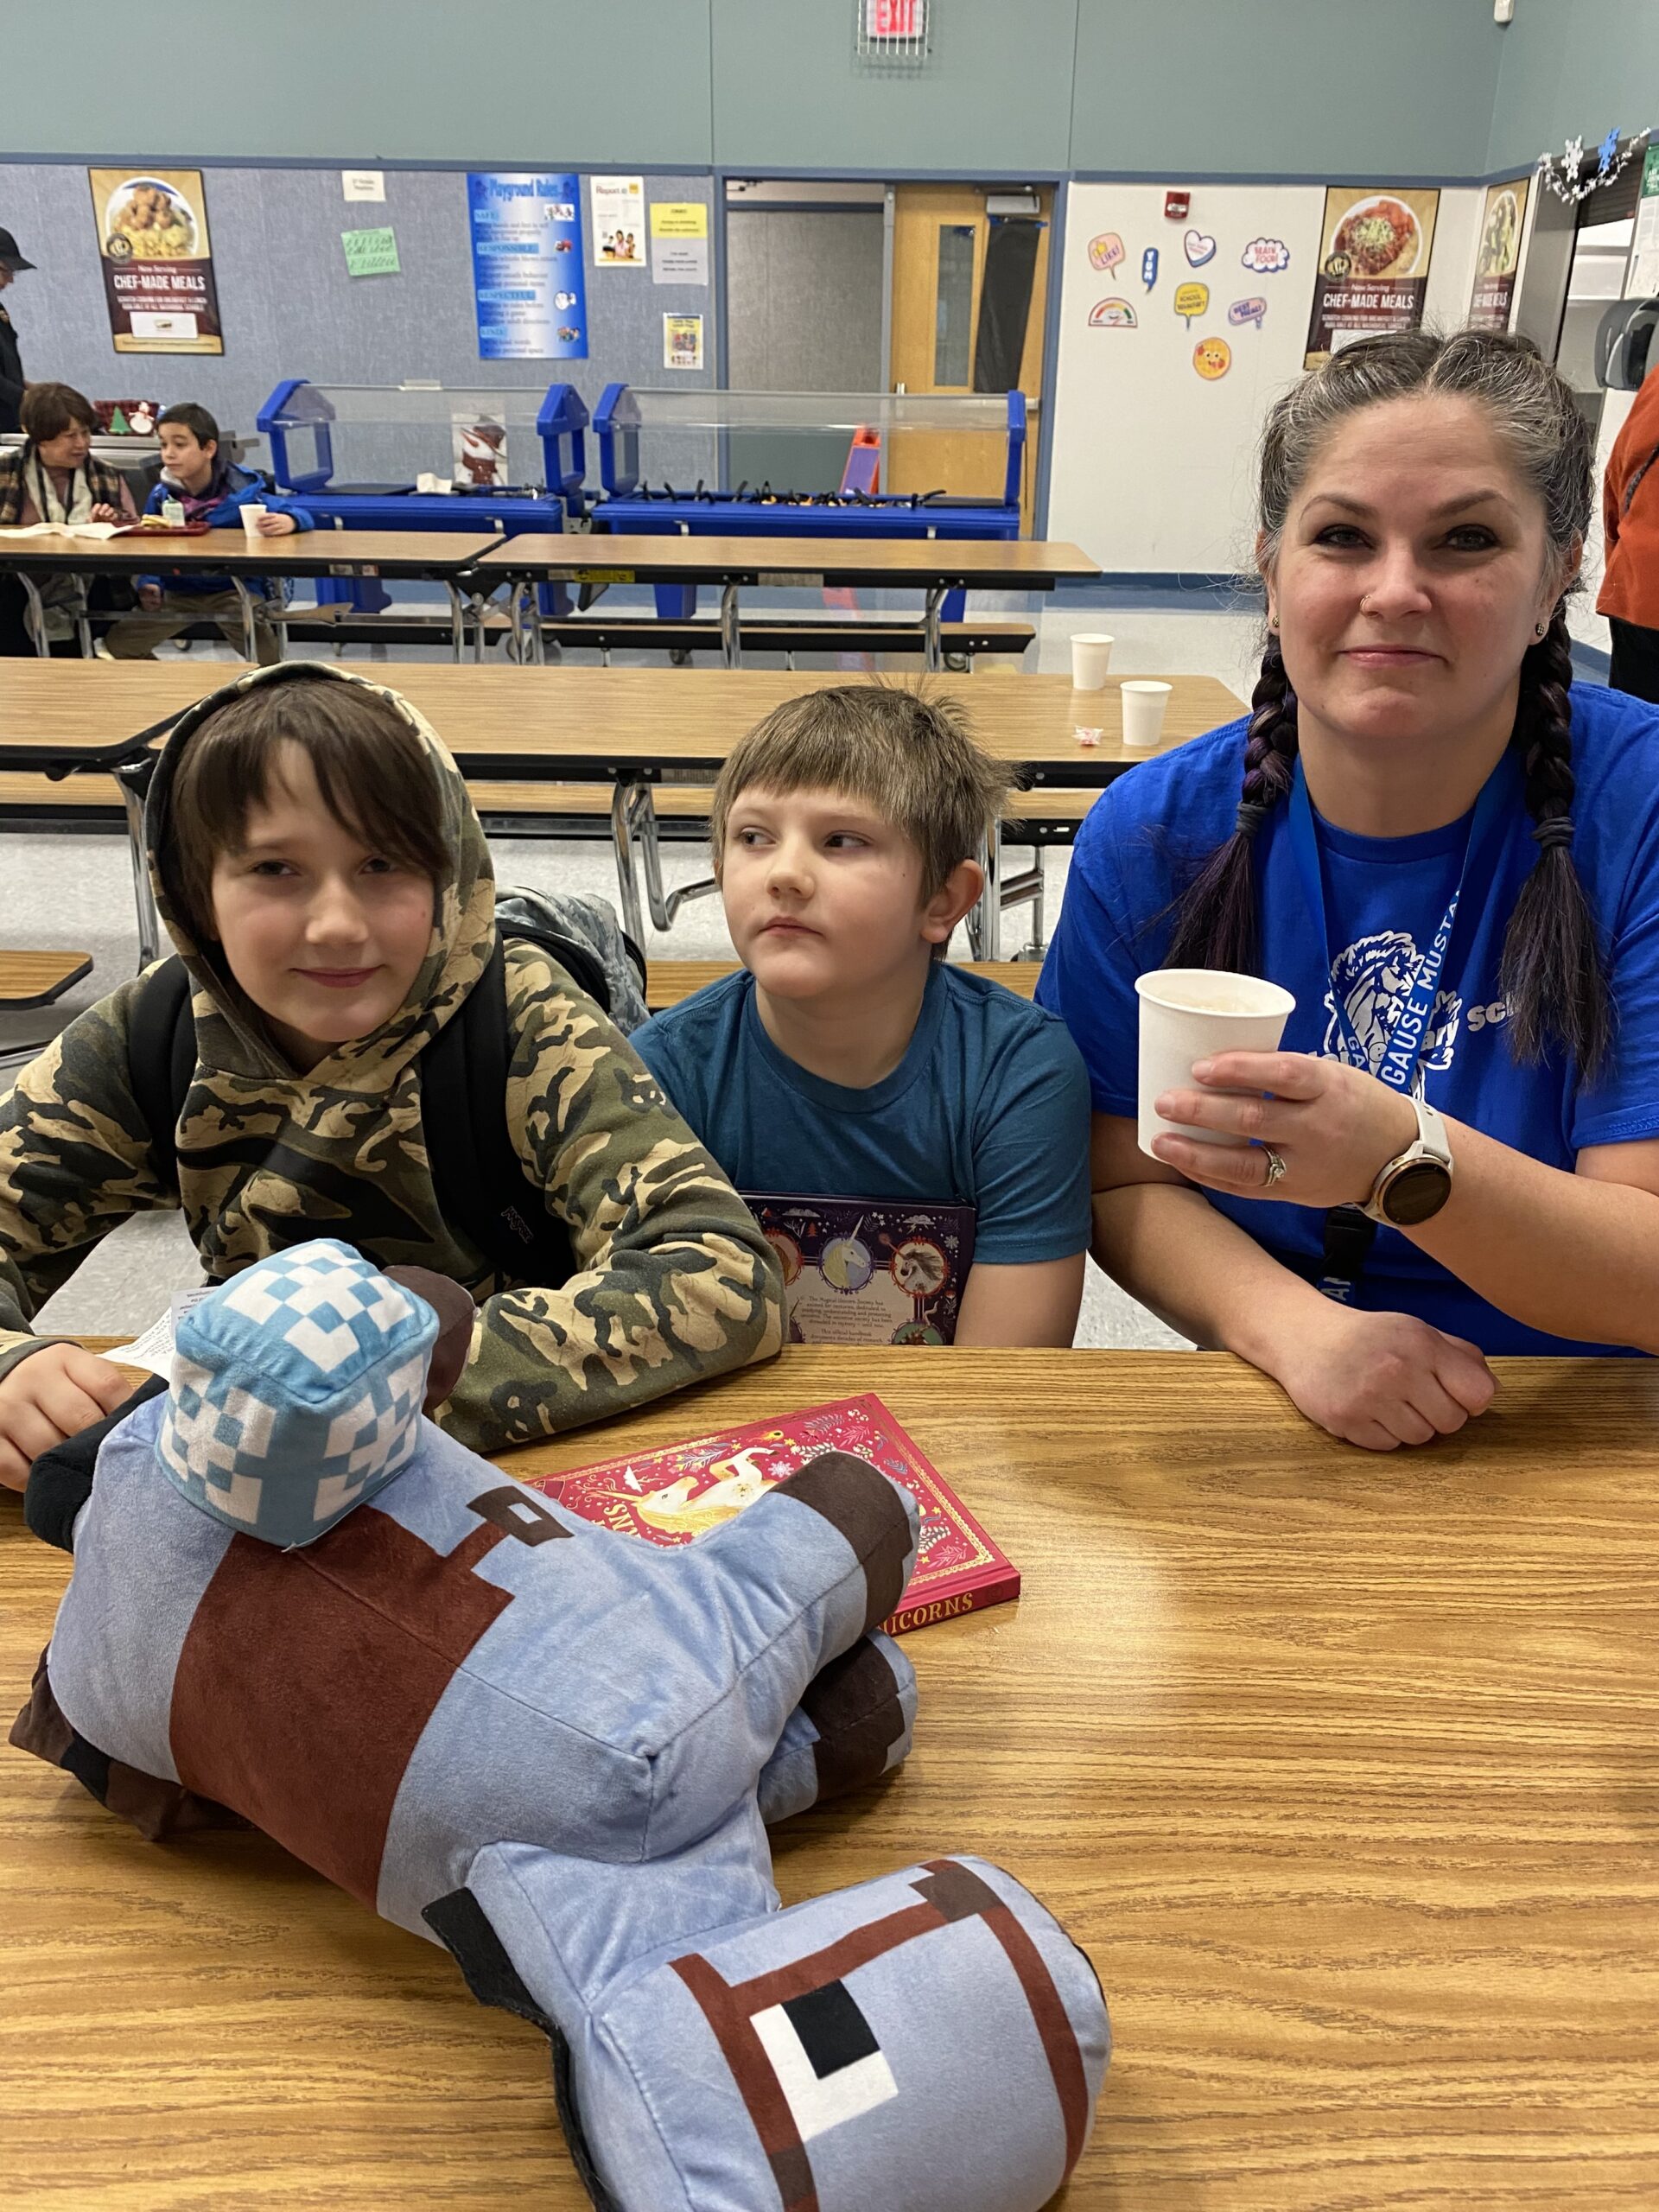 Student and parent enjoy cocoa together in the Gause cafeteria